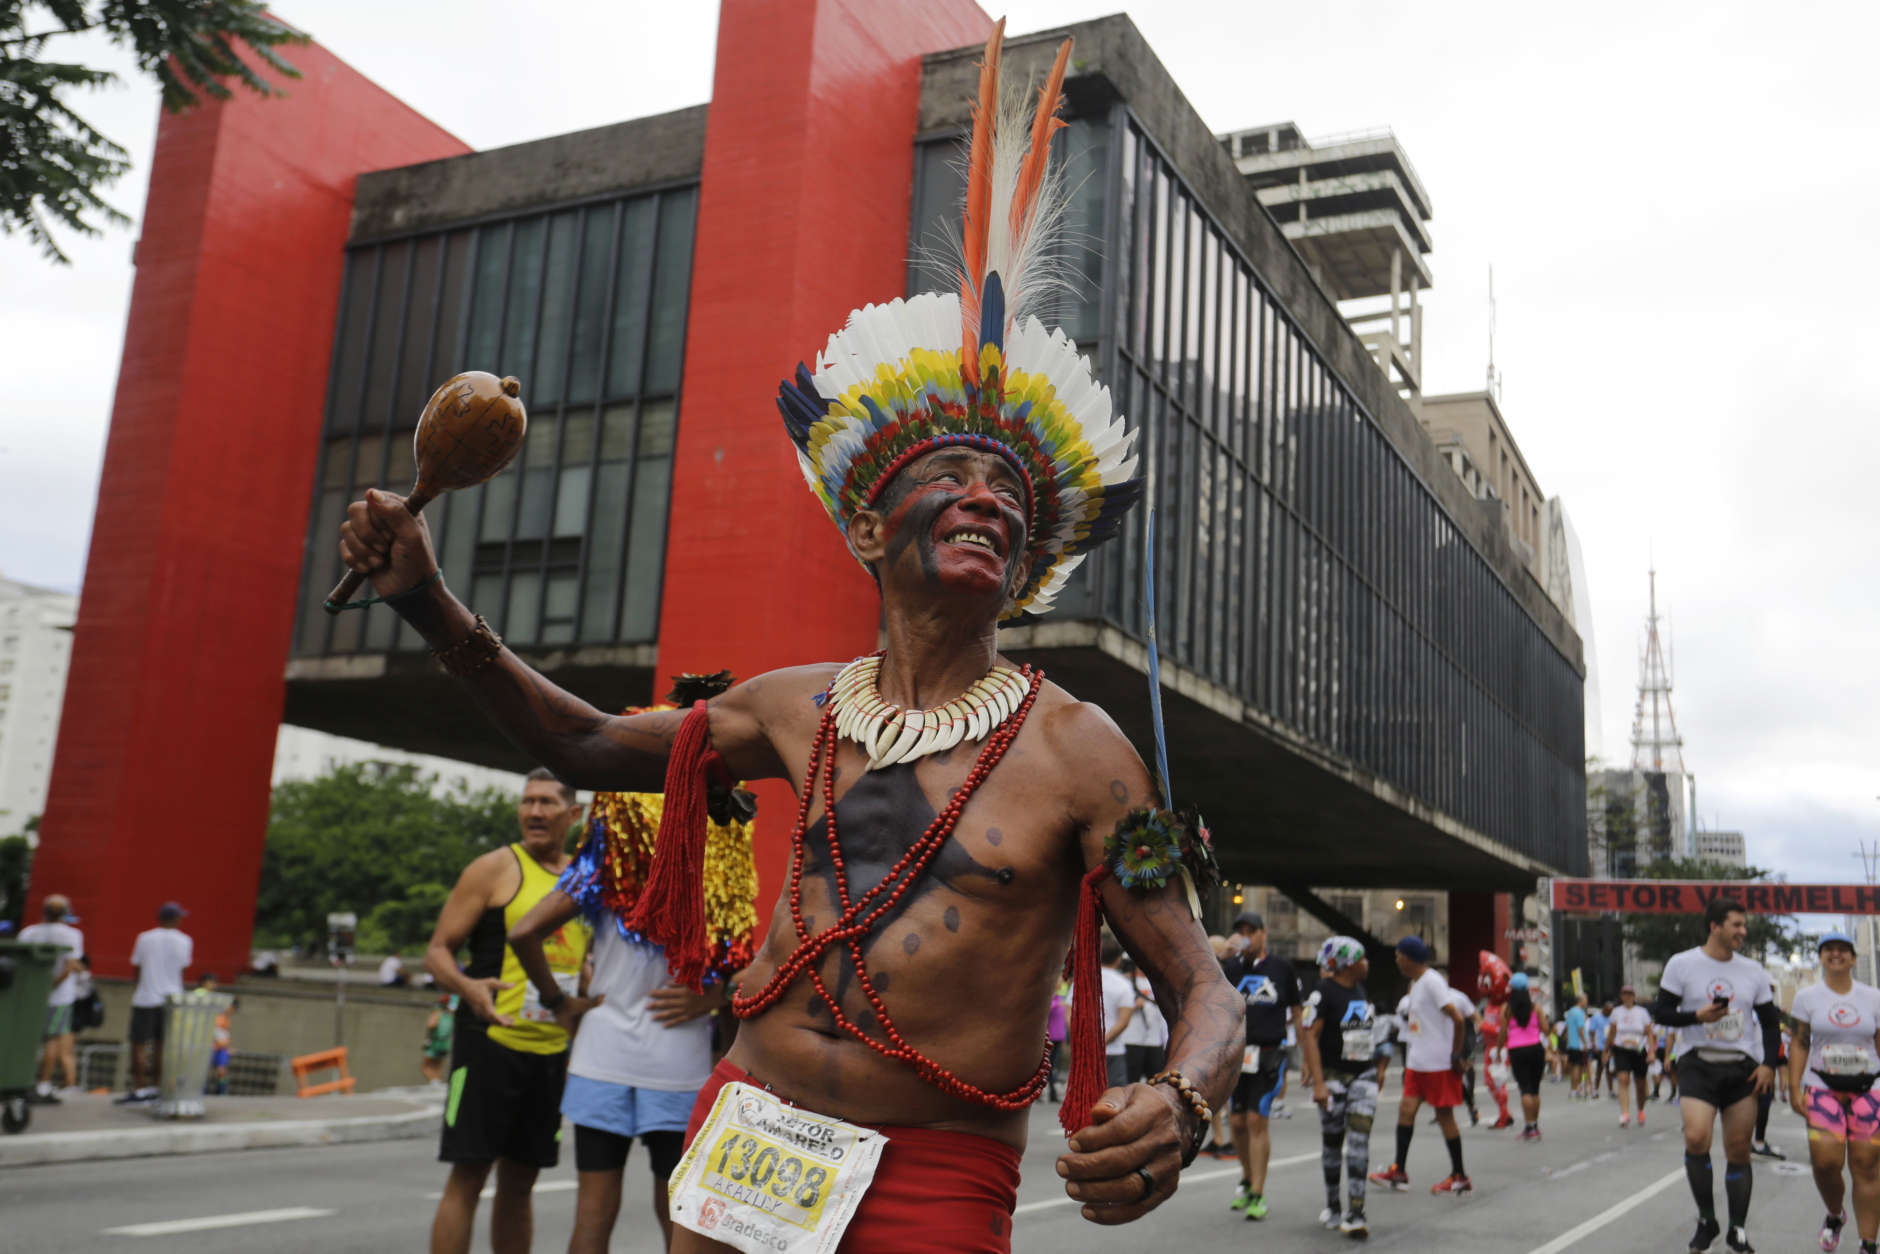 A runner in indigenous attire poses for a photo prior to the Sao Silvestre race in Sao Paulo, Brazil, early Sunday, Dec. 31, 2017. The 15-kilometer race is held annually on New Year's Eve. (AP Photo/Nelson Antoine)